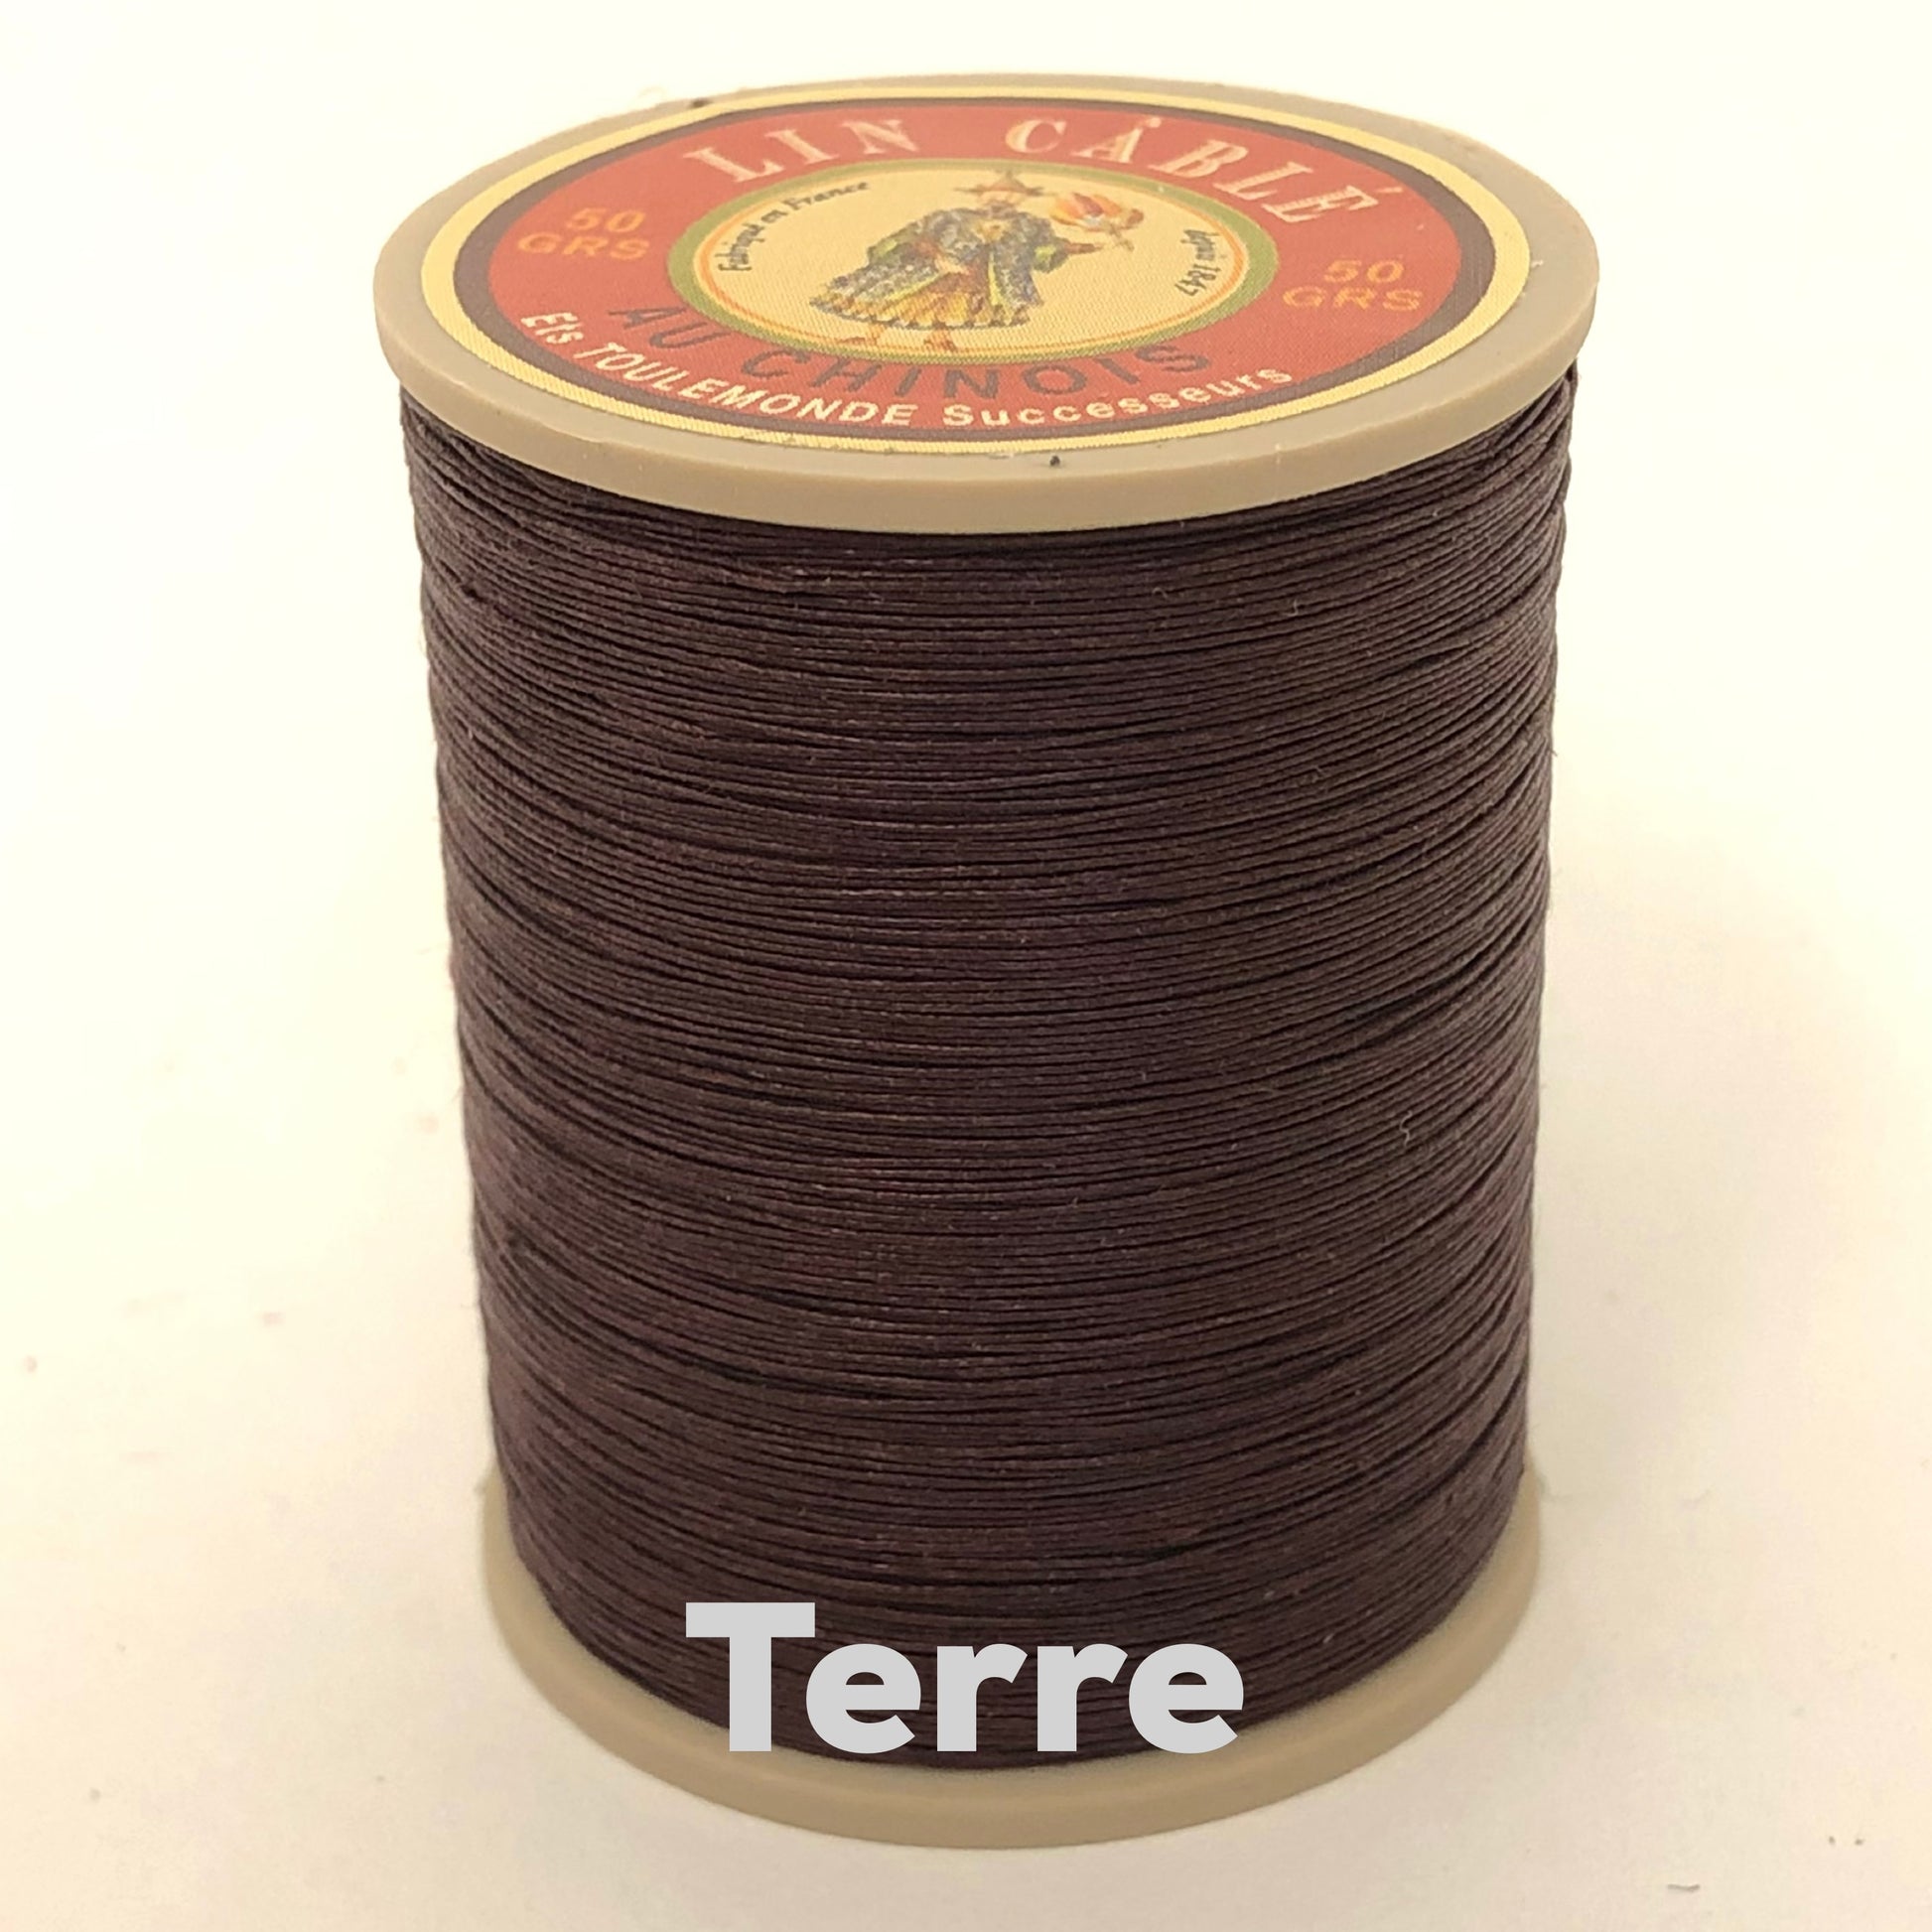 Fil Au Chinois Lin Cable, Waxed Linen Thread, Duck (863) 